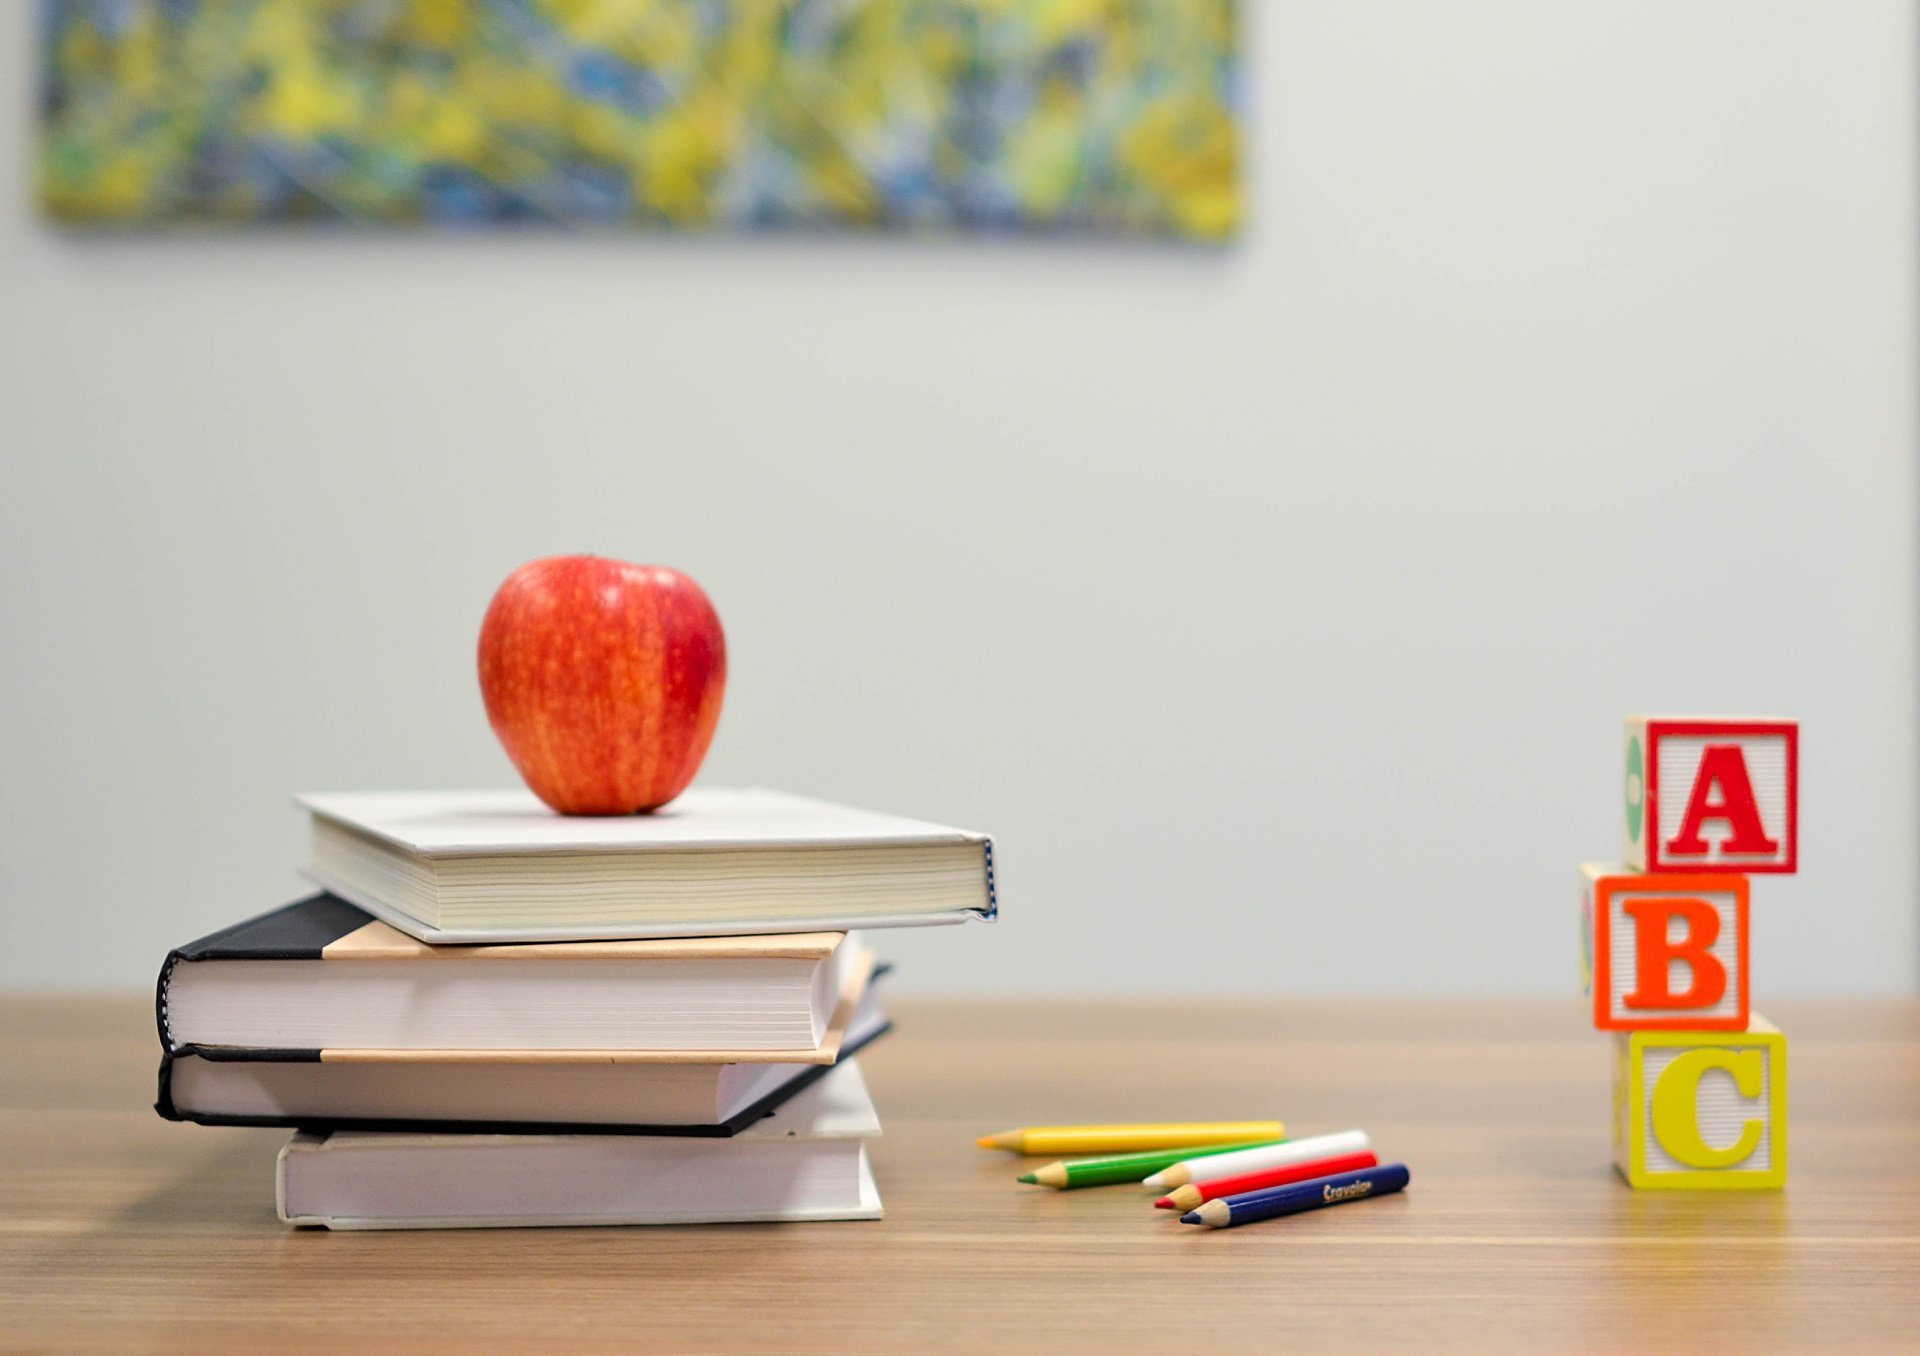 abcs of applied behavior analysis_KNR Therapy blog featured image_apple on top of books on desk